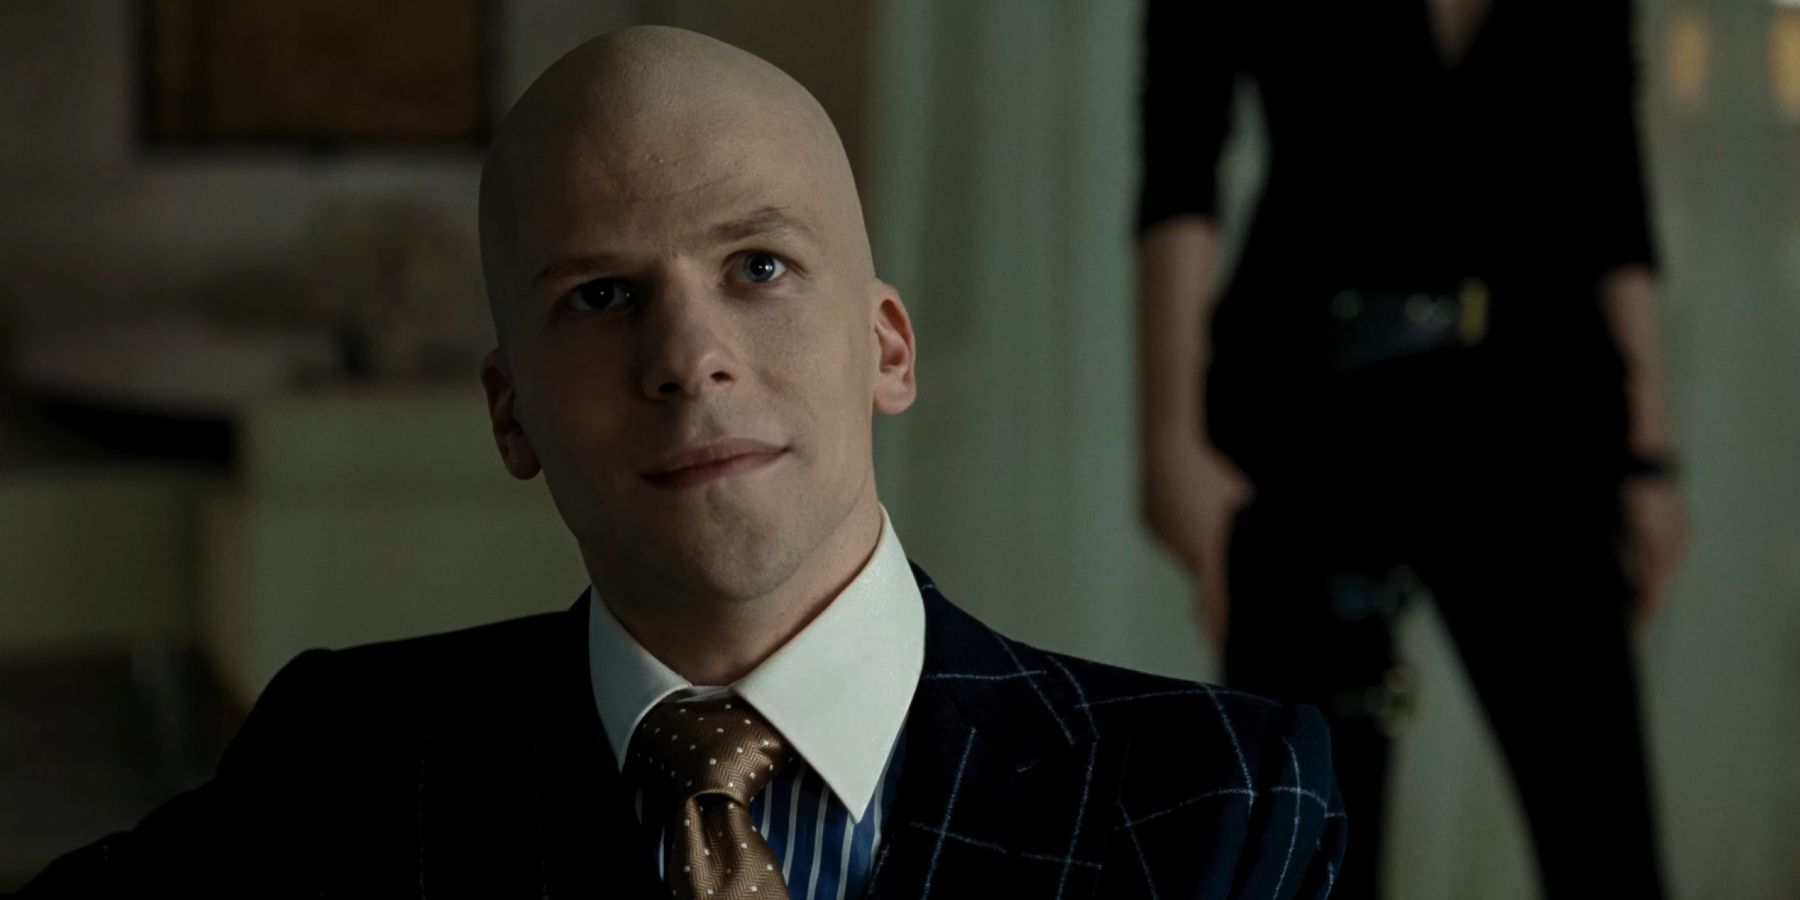 Lex Luthor making a deal with Deathstroke in Zack Snyders Justice League